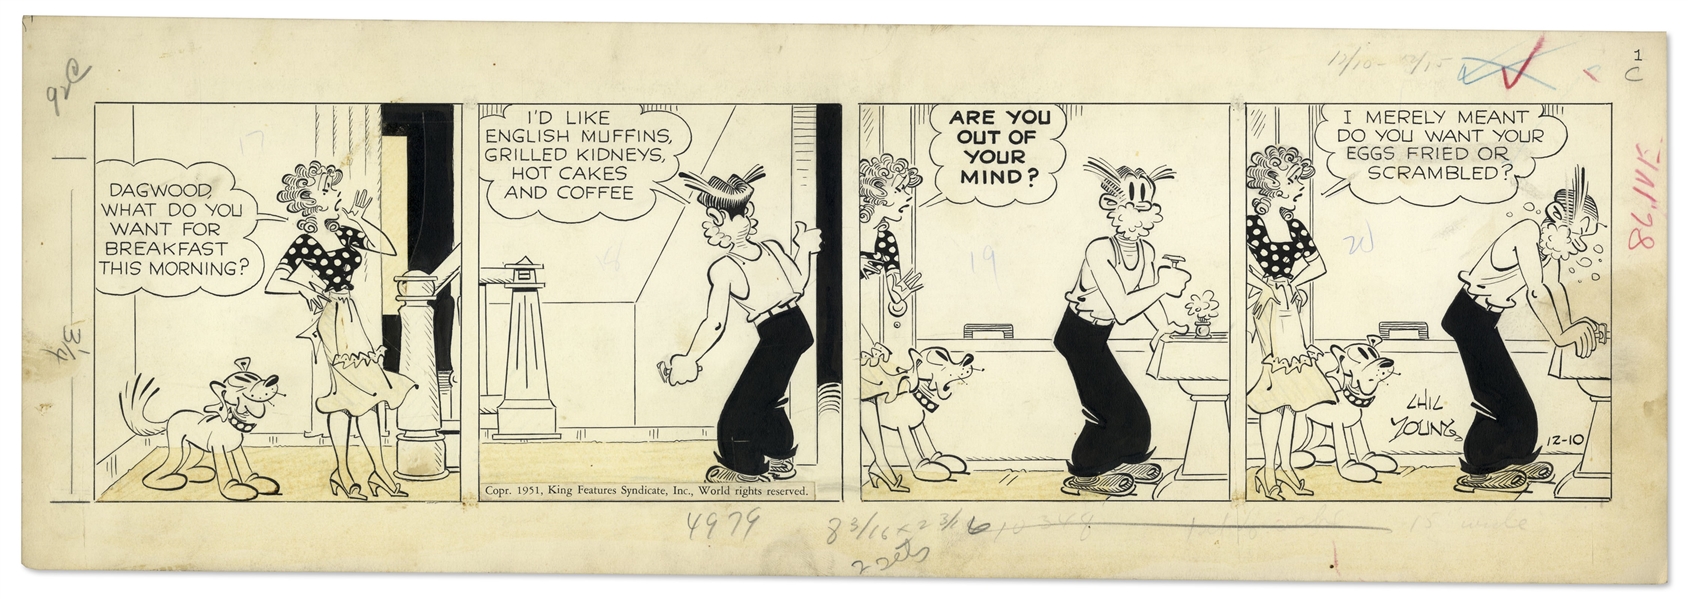 2 Chic Young Hand-Drawn ''Blondie'' Comic Strips From 1951 Titled ''Butterer-Upper!'' and ''How About Boiled?''